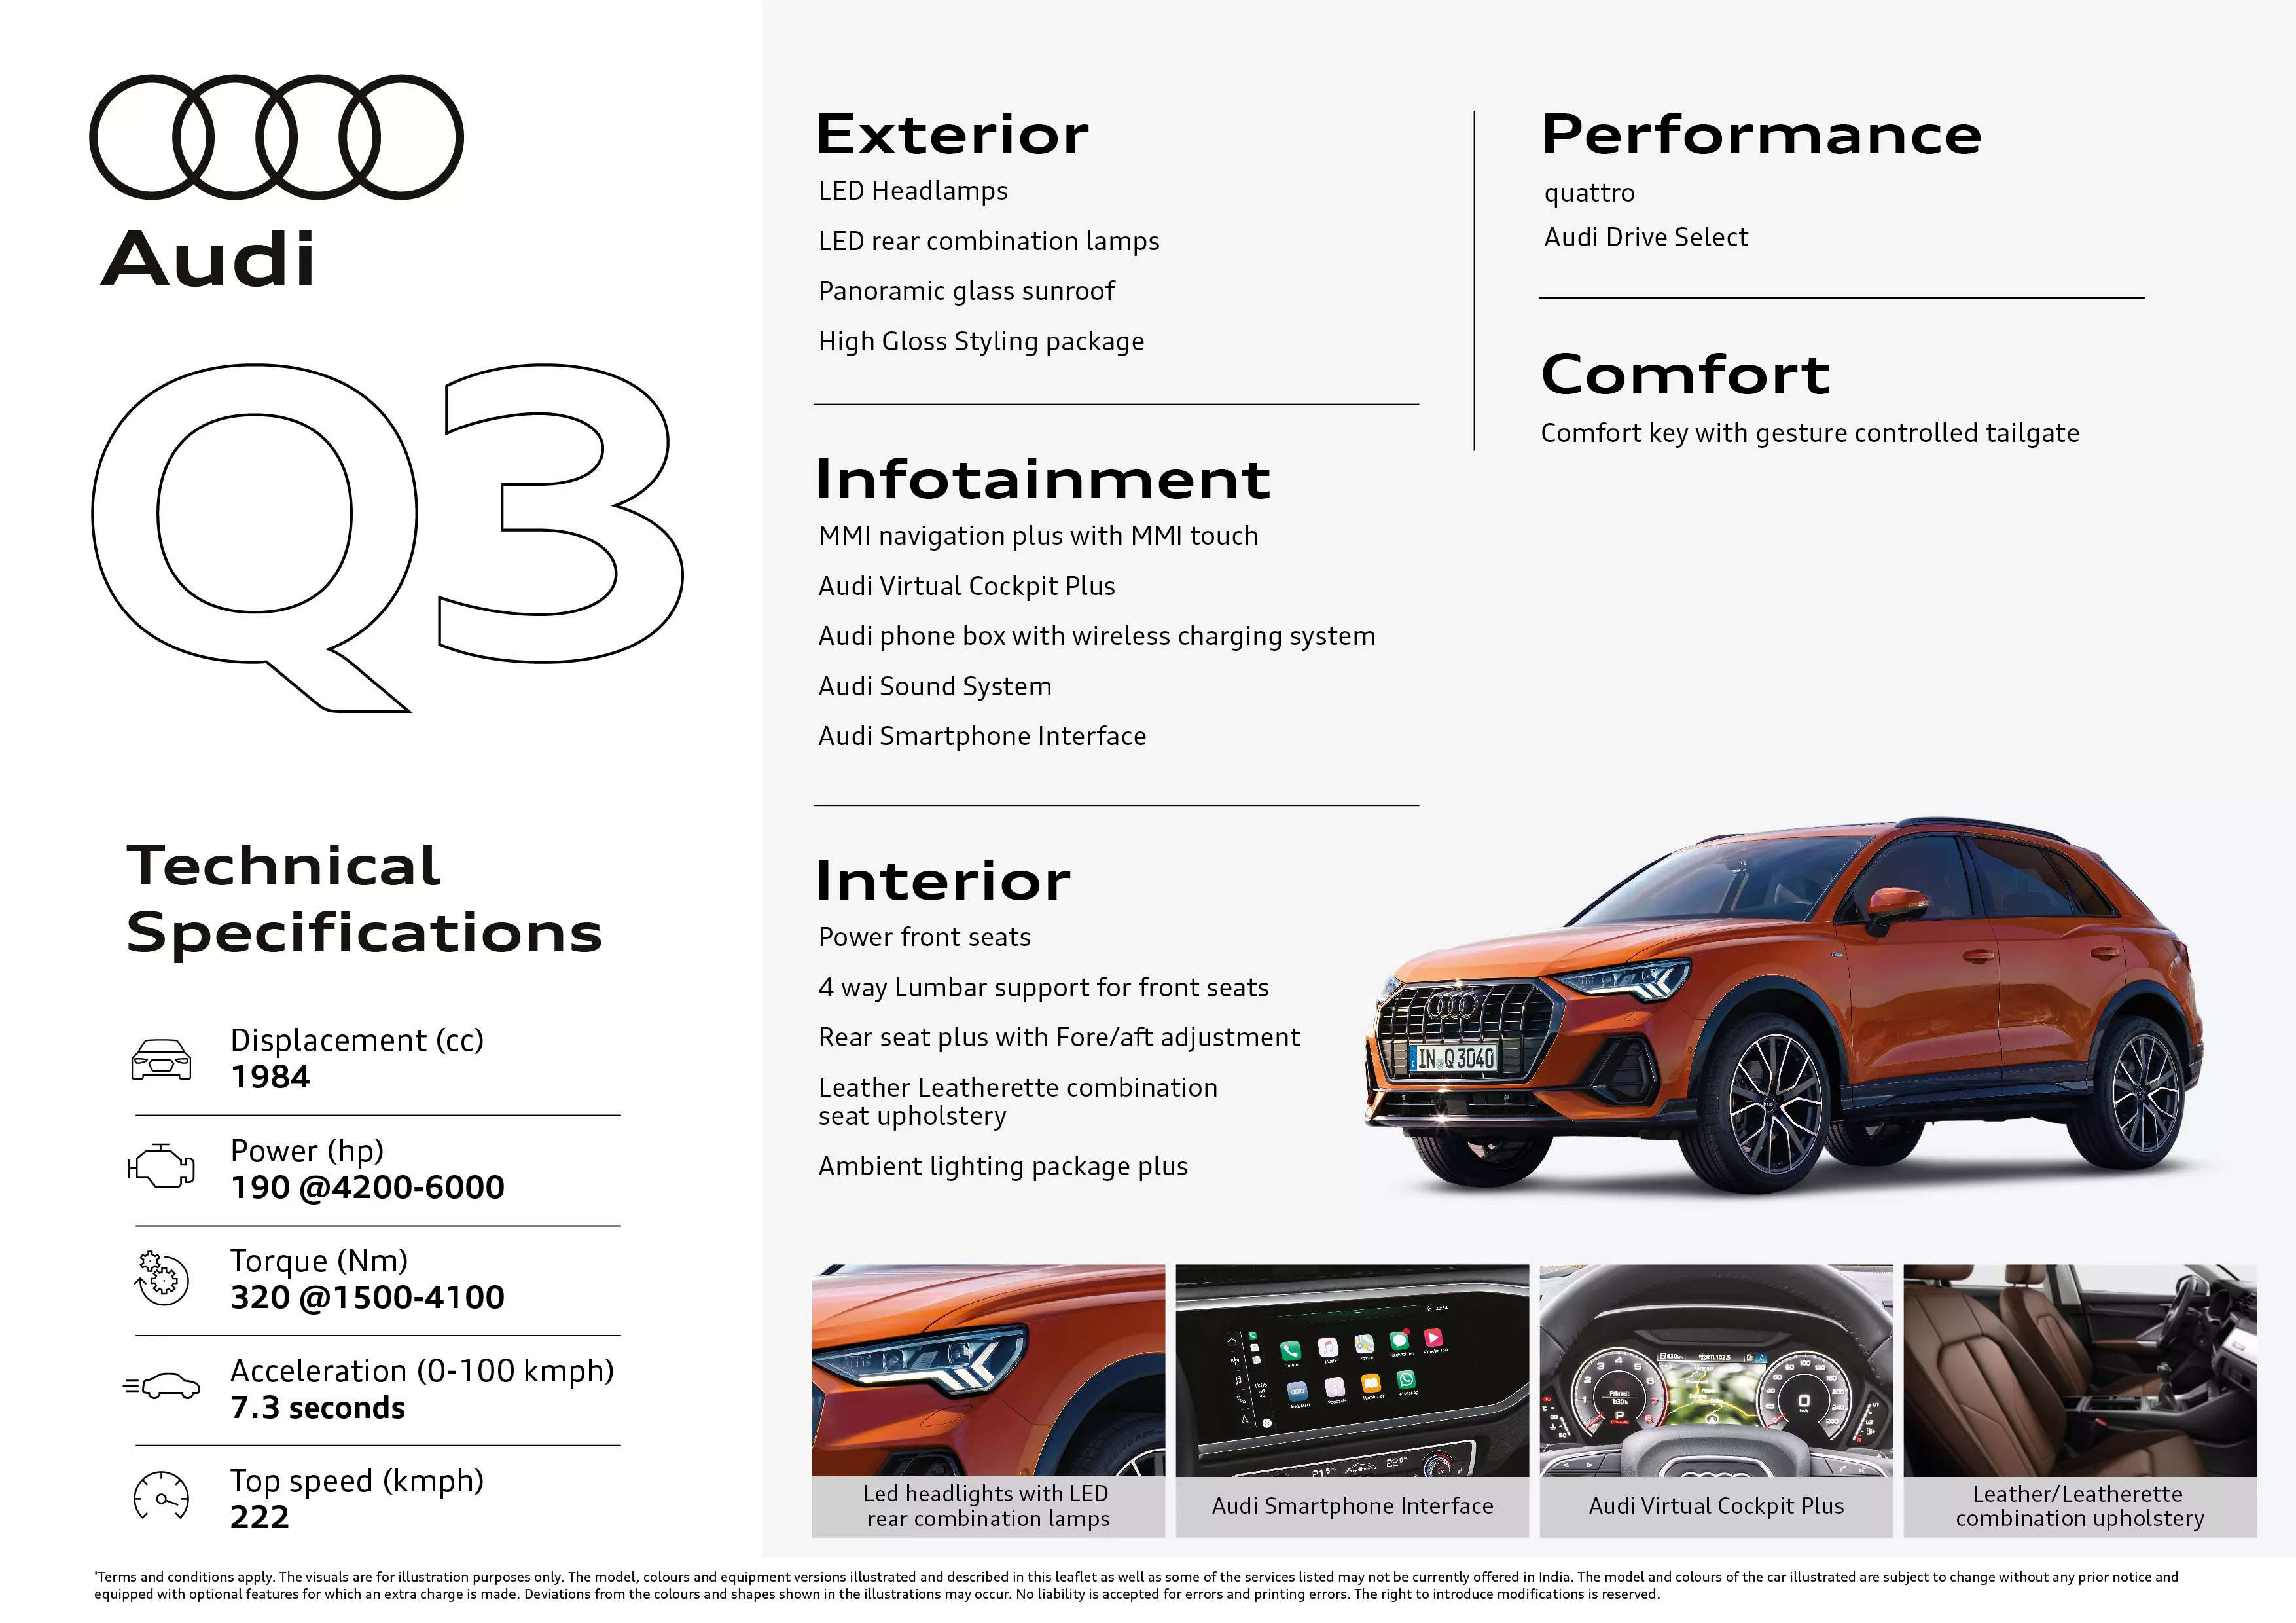 New Audi Q3 bookings are open in India for INR 2 lakh, deliveries by year-end